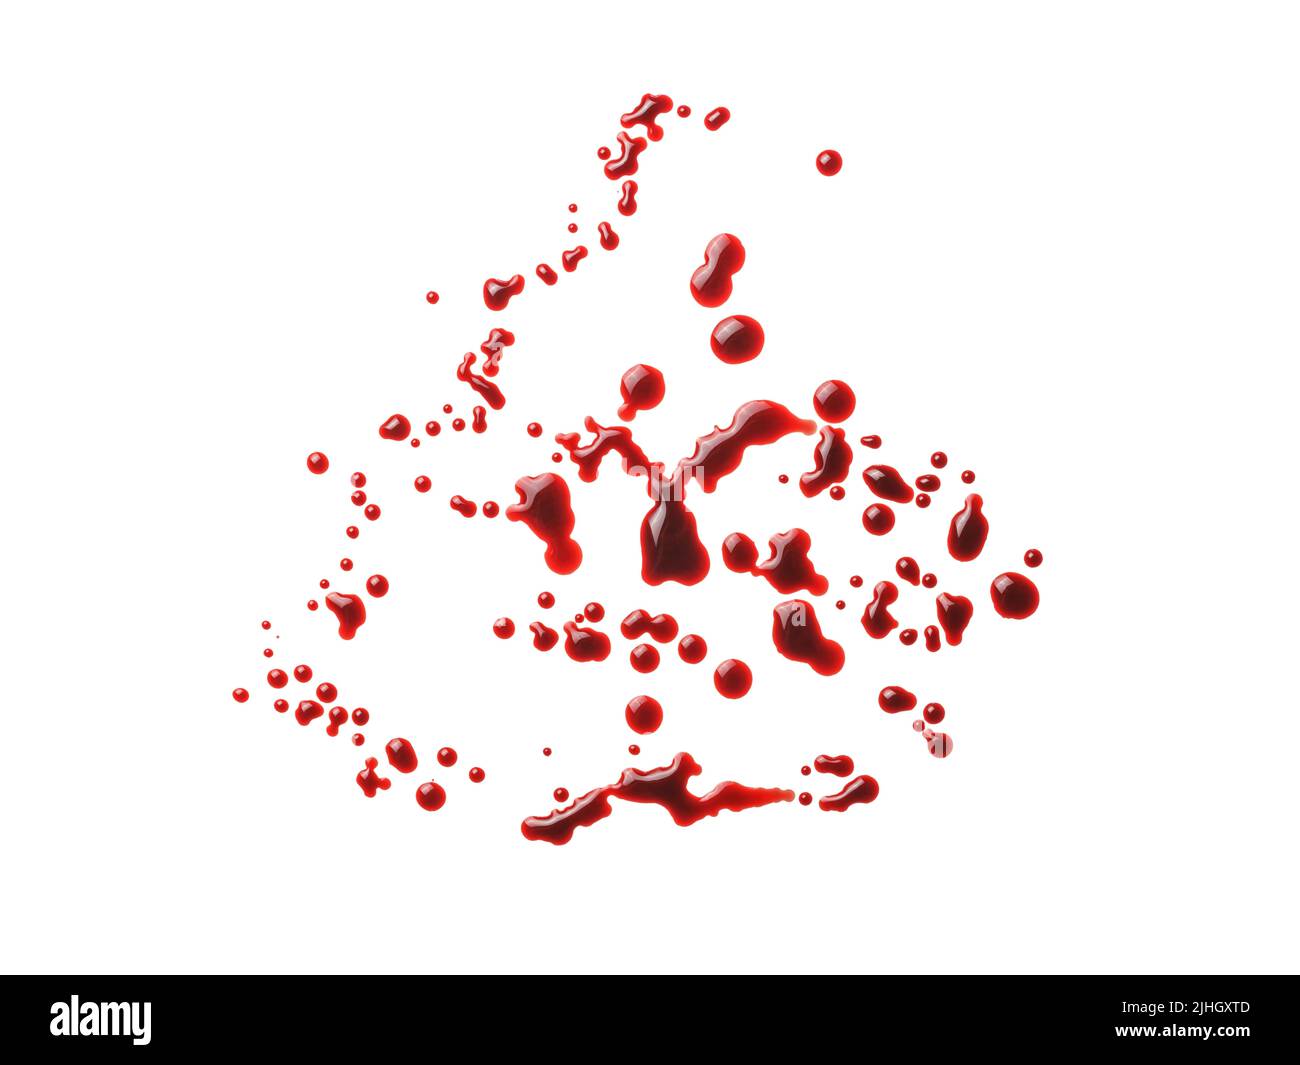 Blood drops close up. Top view isolated on white, clipping path included Stock Photo